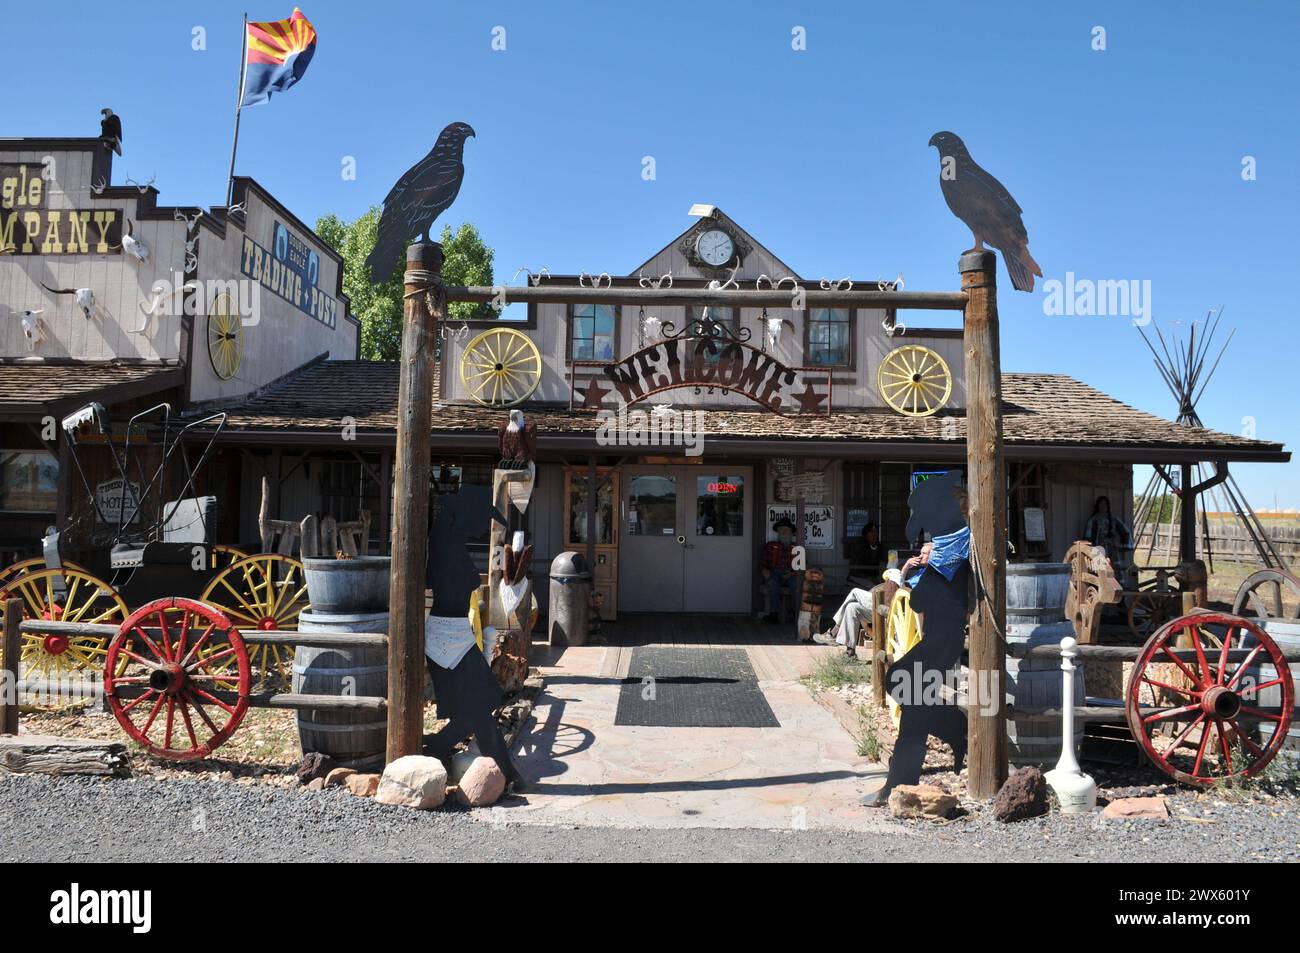 Valle Kaibab national forest area /Arizona/USA /  09.September 2019 / Double eagle trading company in Valle and market Native american,old west craft curisos  wagon work in Valle Arizona United States.  (Photo. Francis Dean/Deanpictures) Stock Photo